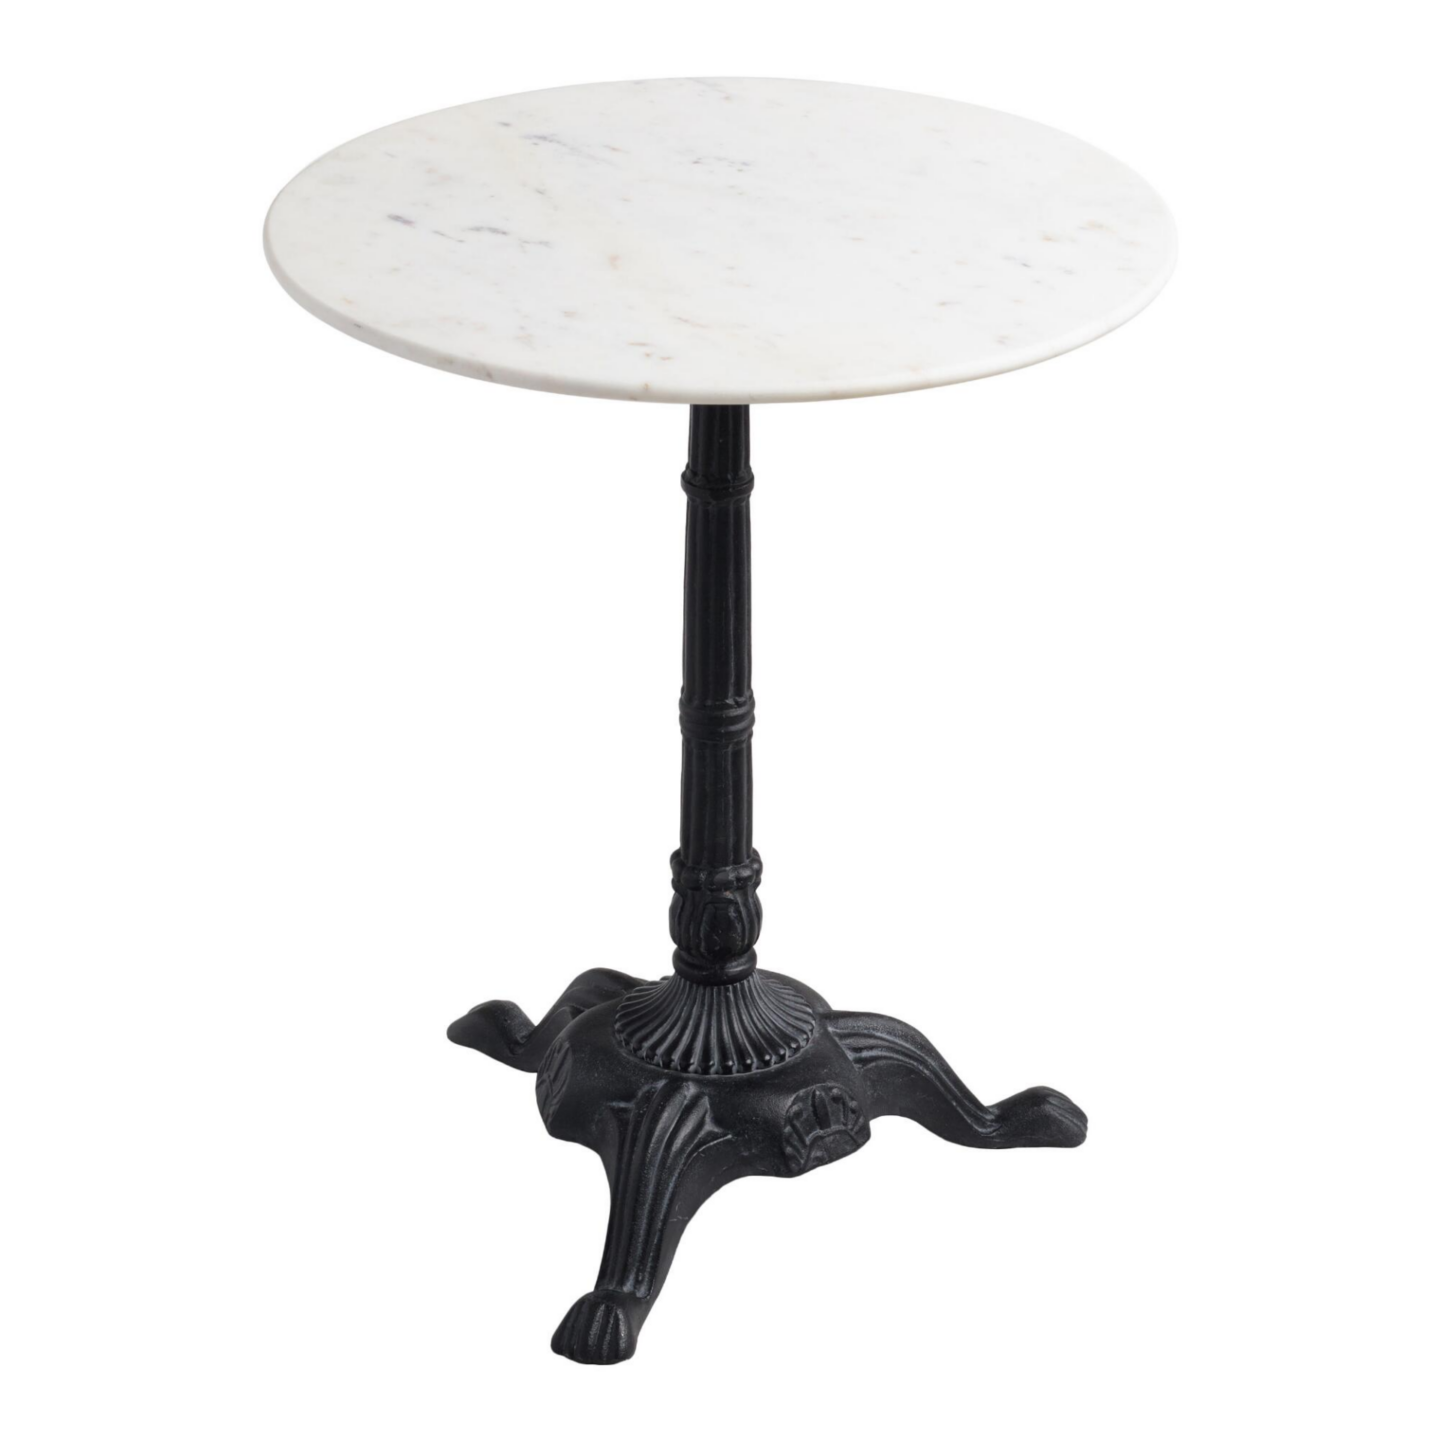 Round White Marble And Black Metal Bistro Accent Table - World Market. #frenchbistro #bistrotables #marbletop